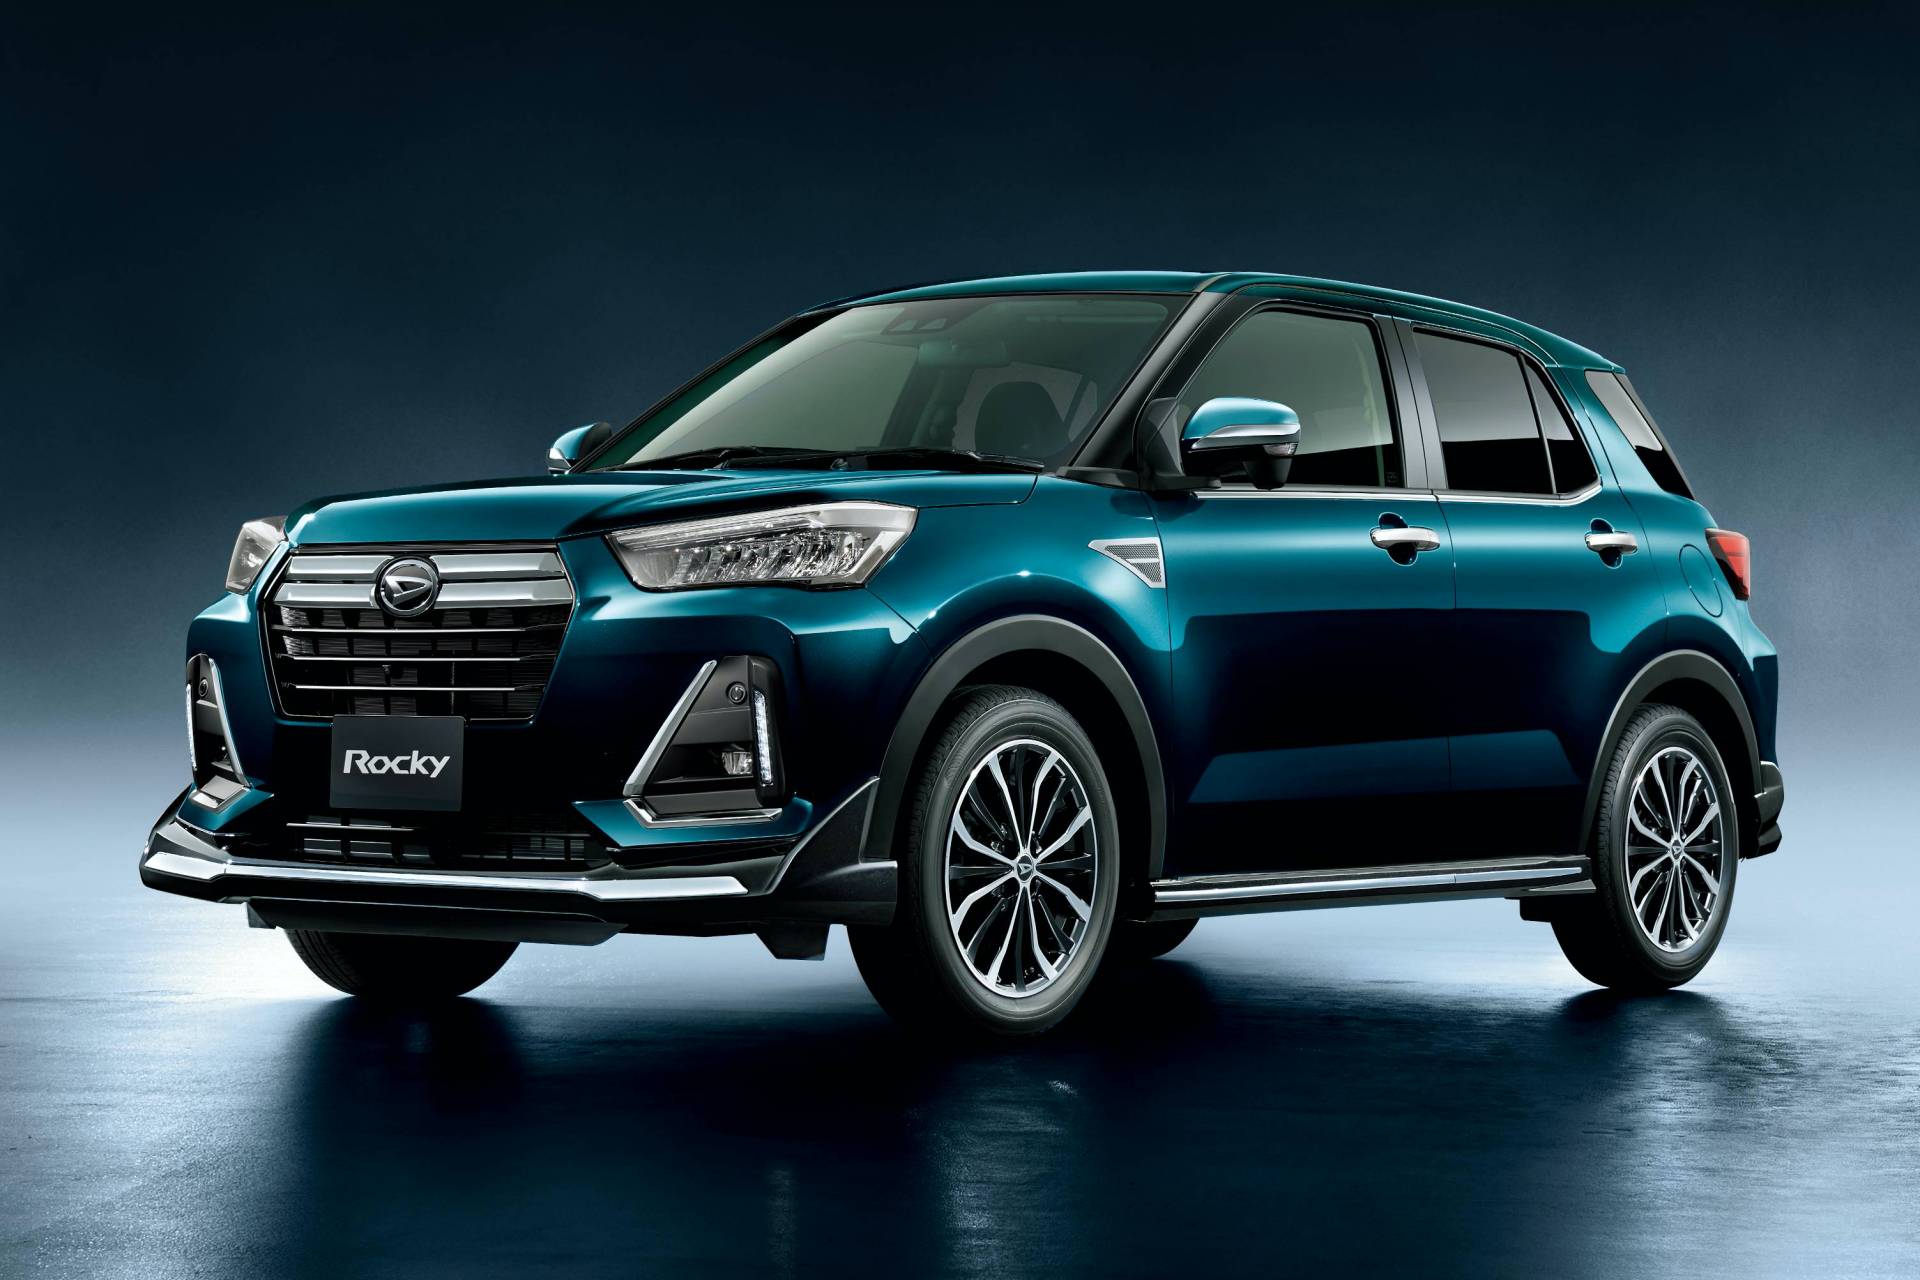 2020 Daihatsu Rocky Launches In Japan With Factory Tuning Packs | Carscoops